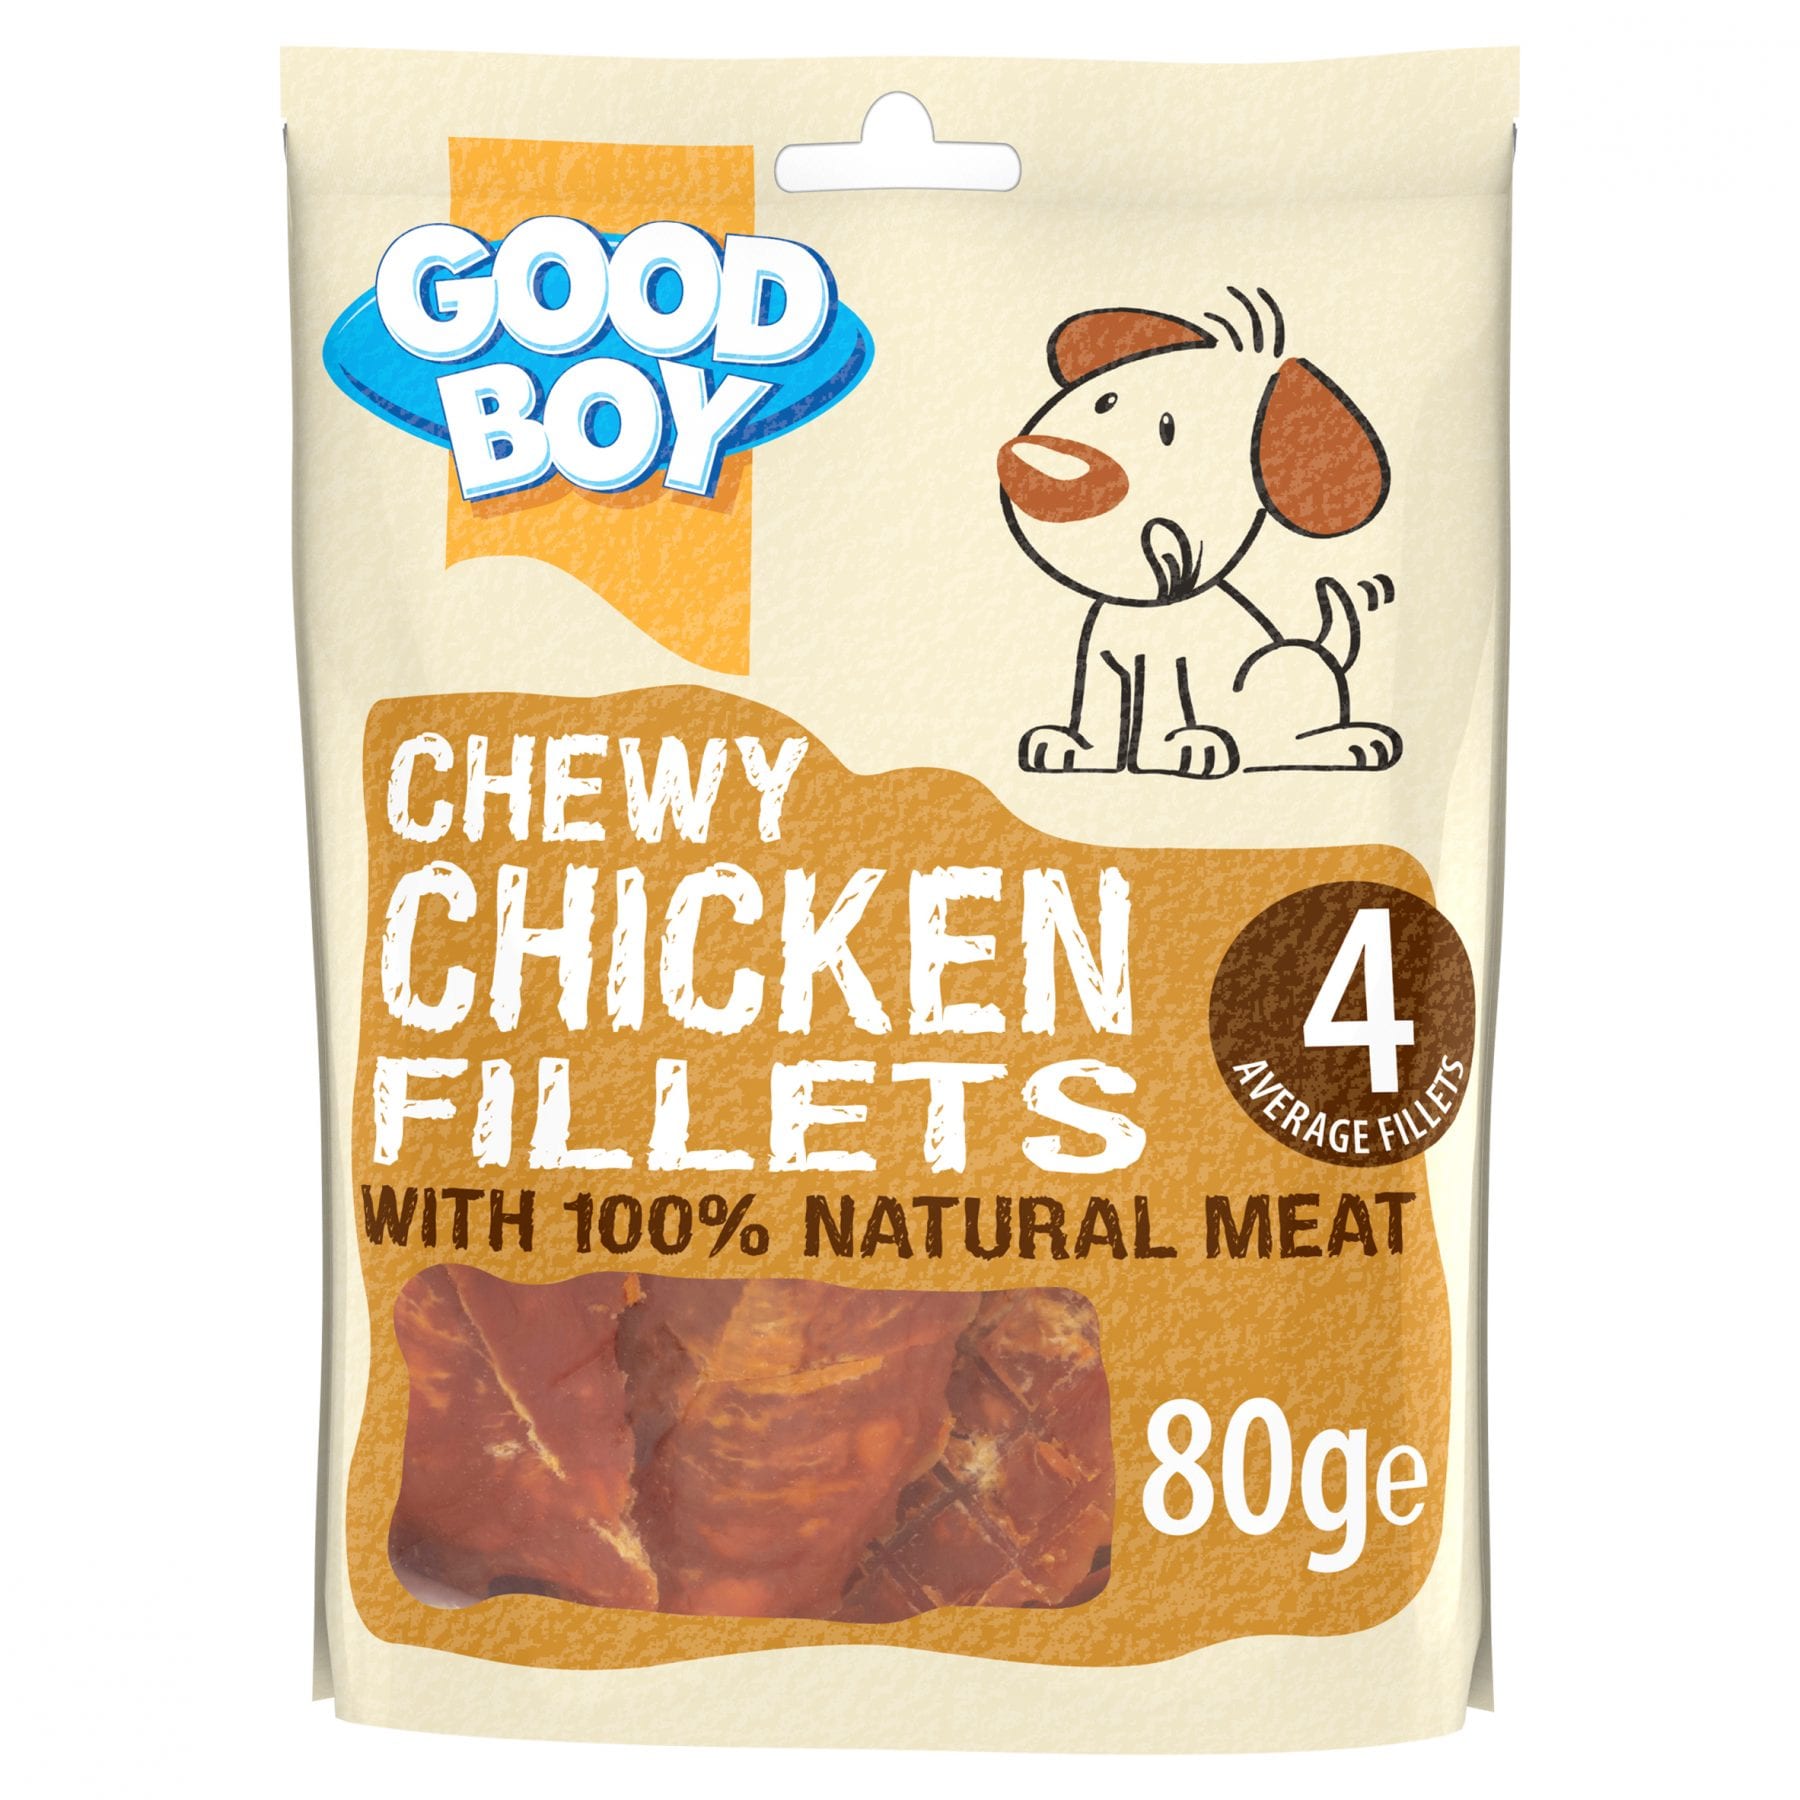 Chewy Chicken Fillets Dog Treats 80g 